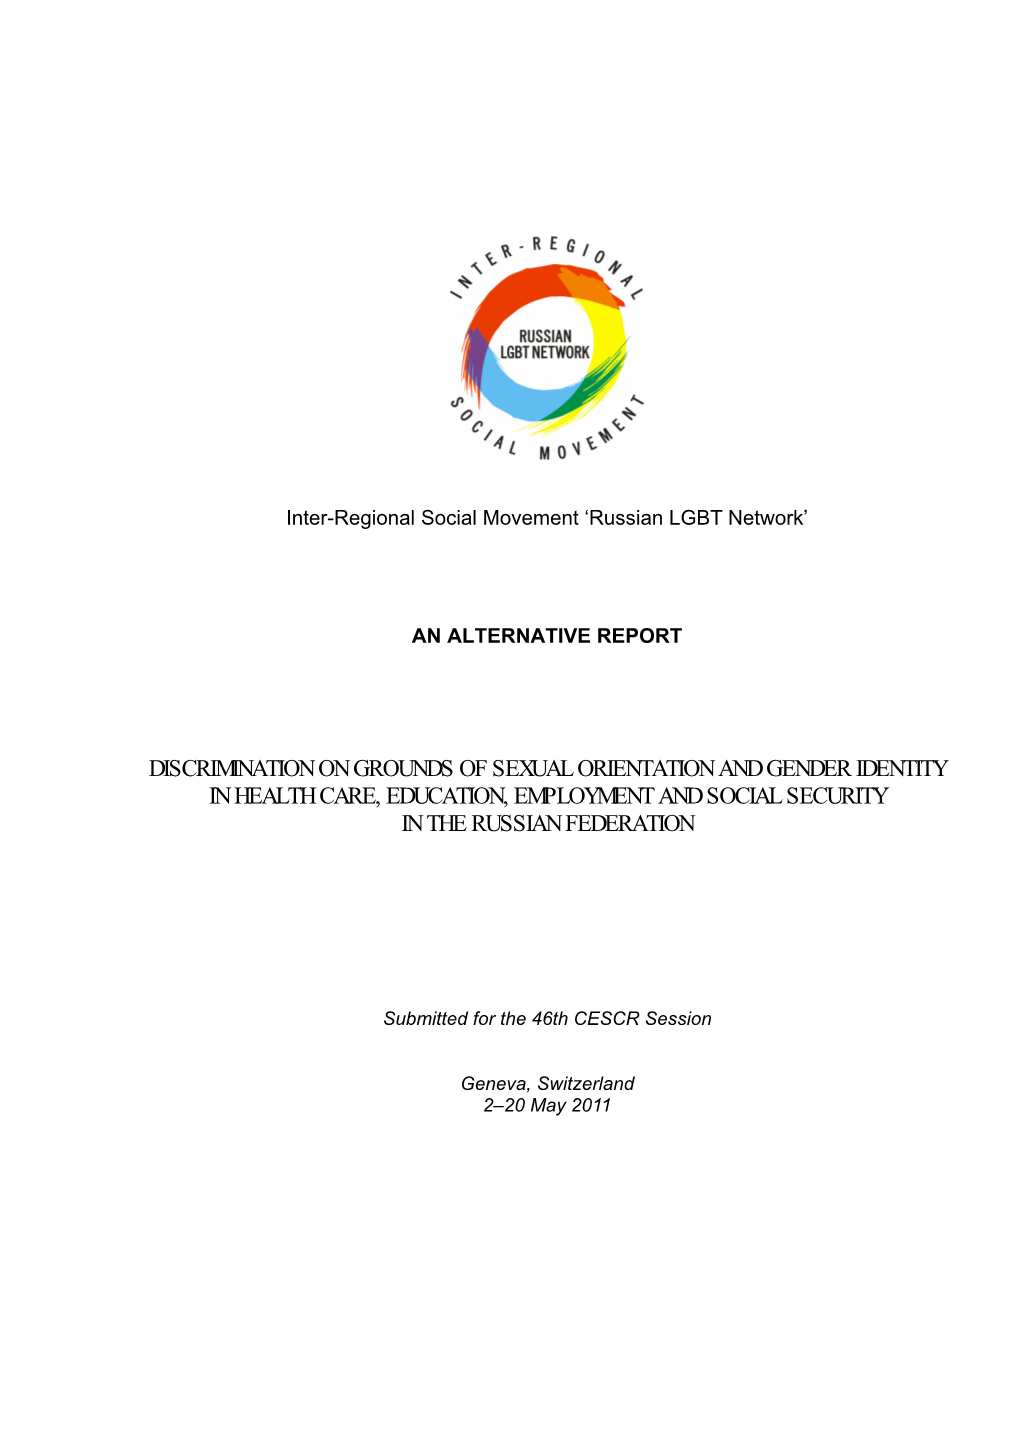 Discrimination on Grounds of Sexual Orientation and Gender Identity in Health Care, Education, Employment and Social Security in the Russian Federation